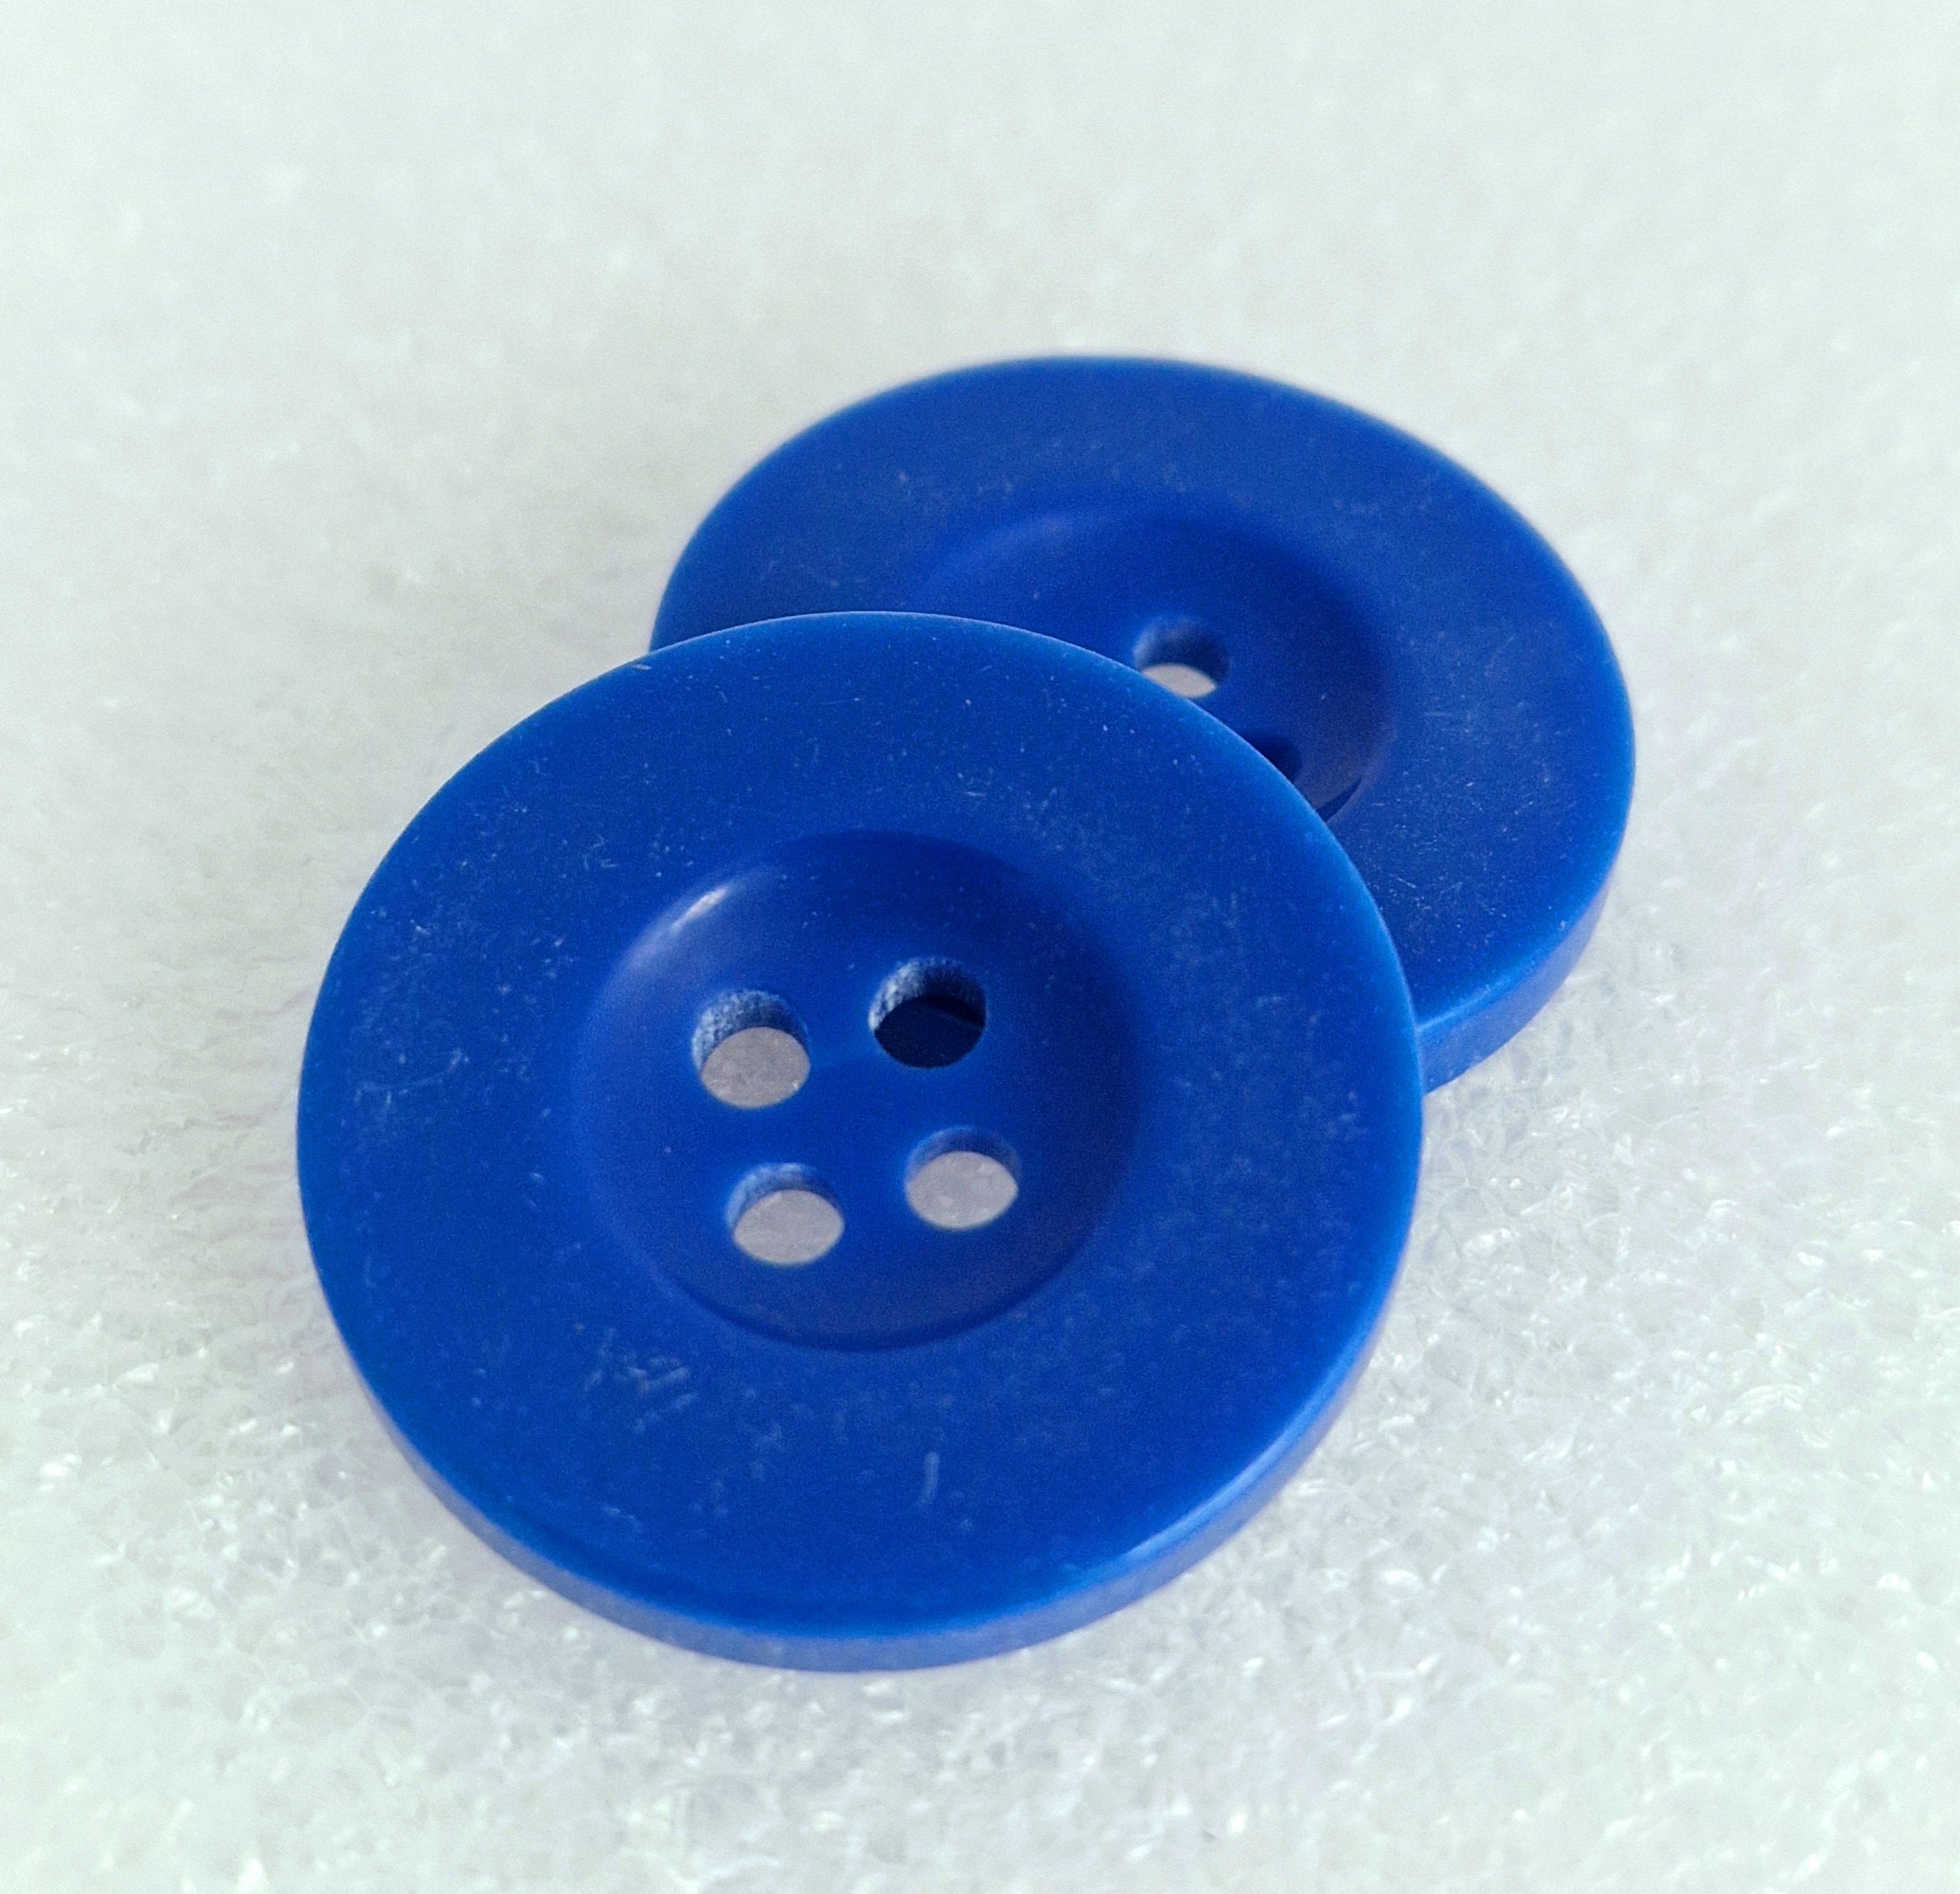 MajorCrafts 16pcs 25mm Royal Blue 4 Holes Round Resin Sewing Buttons